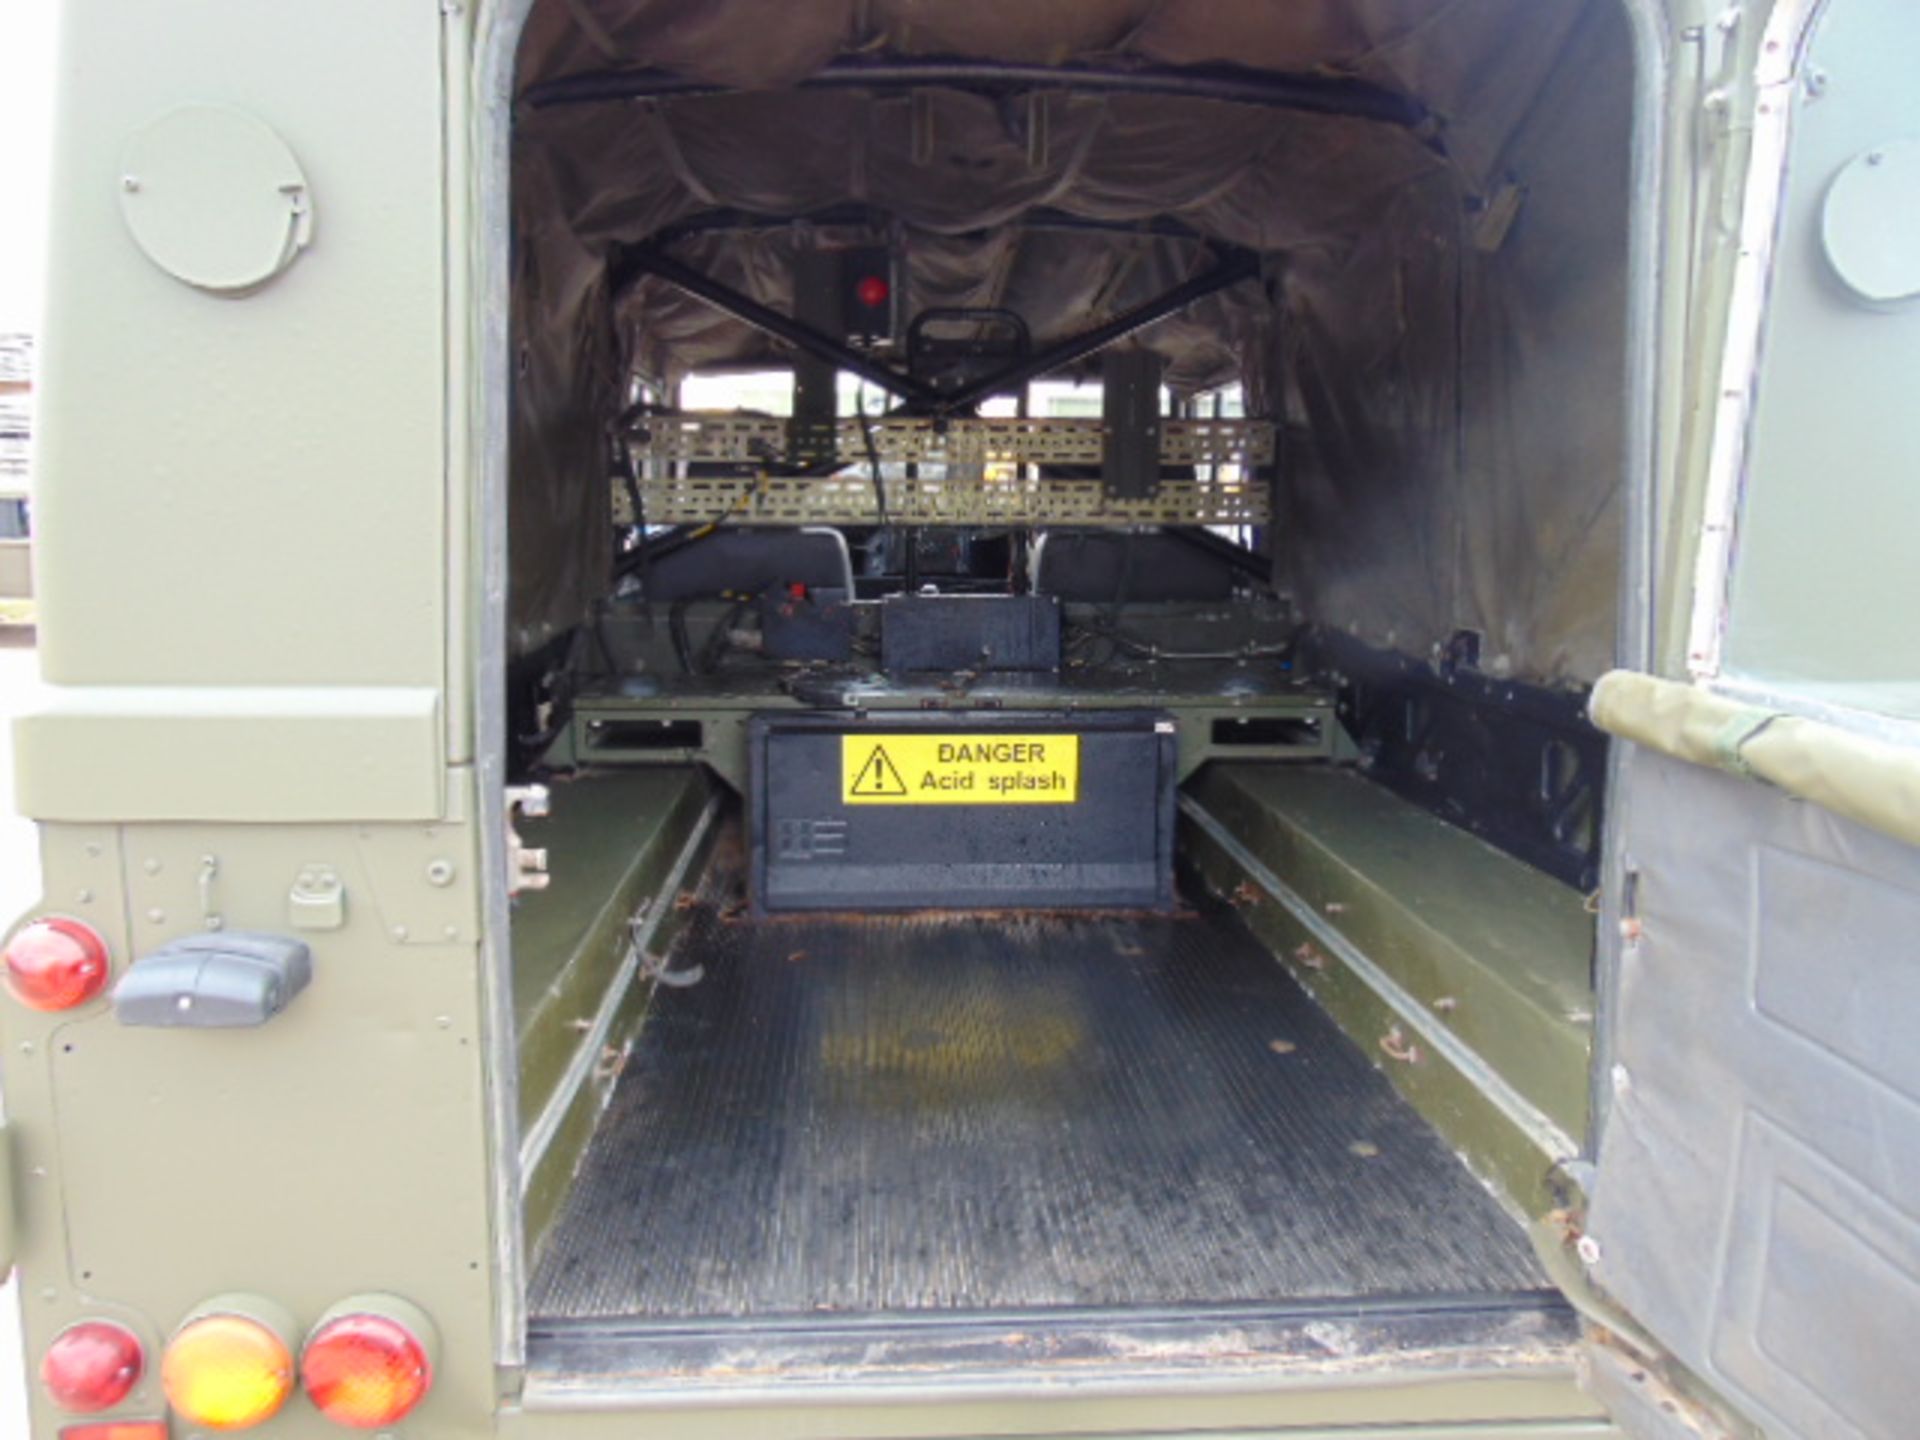 Military Specification Land Rover Wolf 110 Hard Top - Image 13 of 25